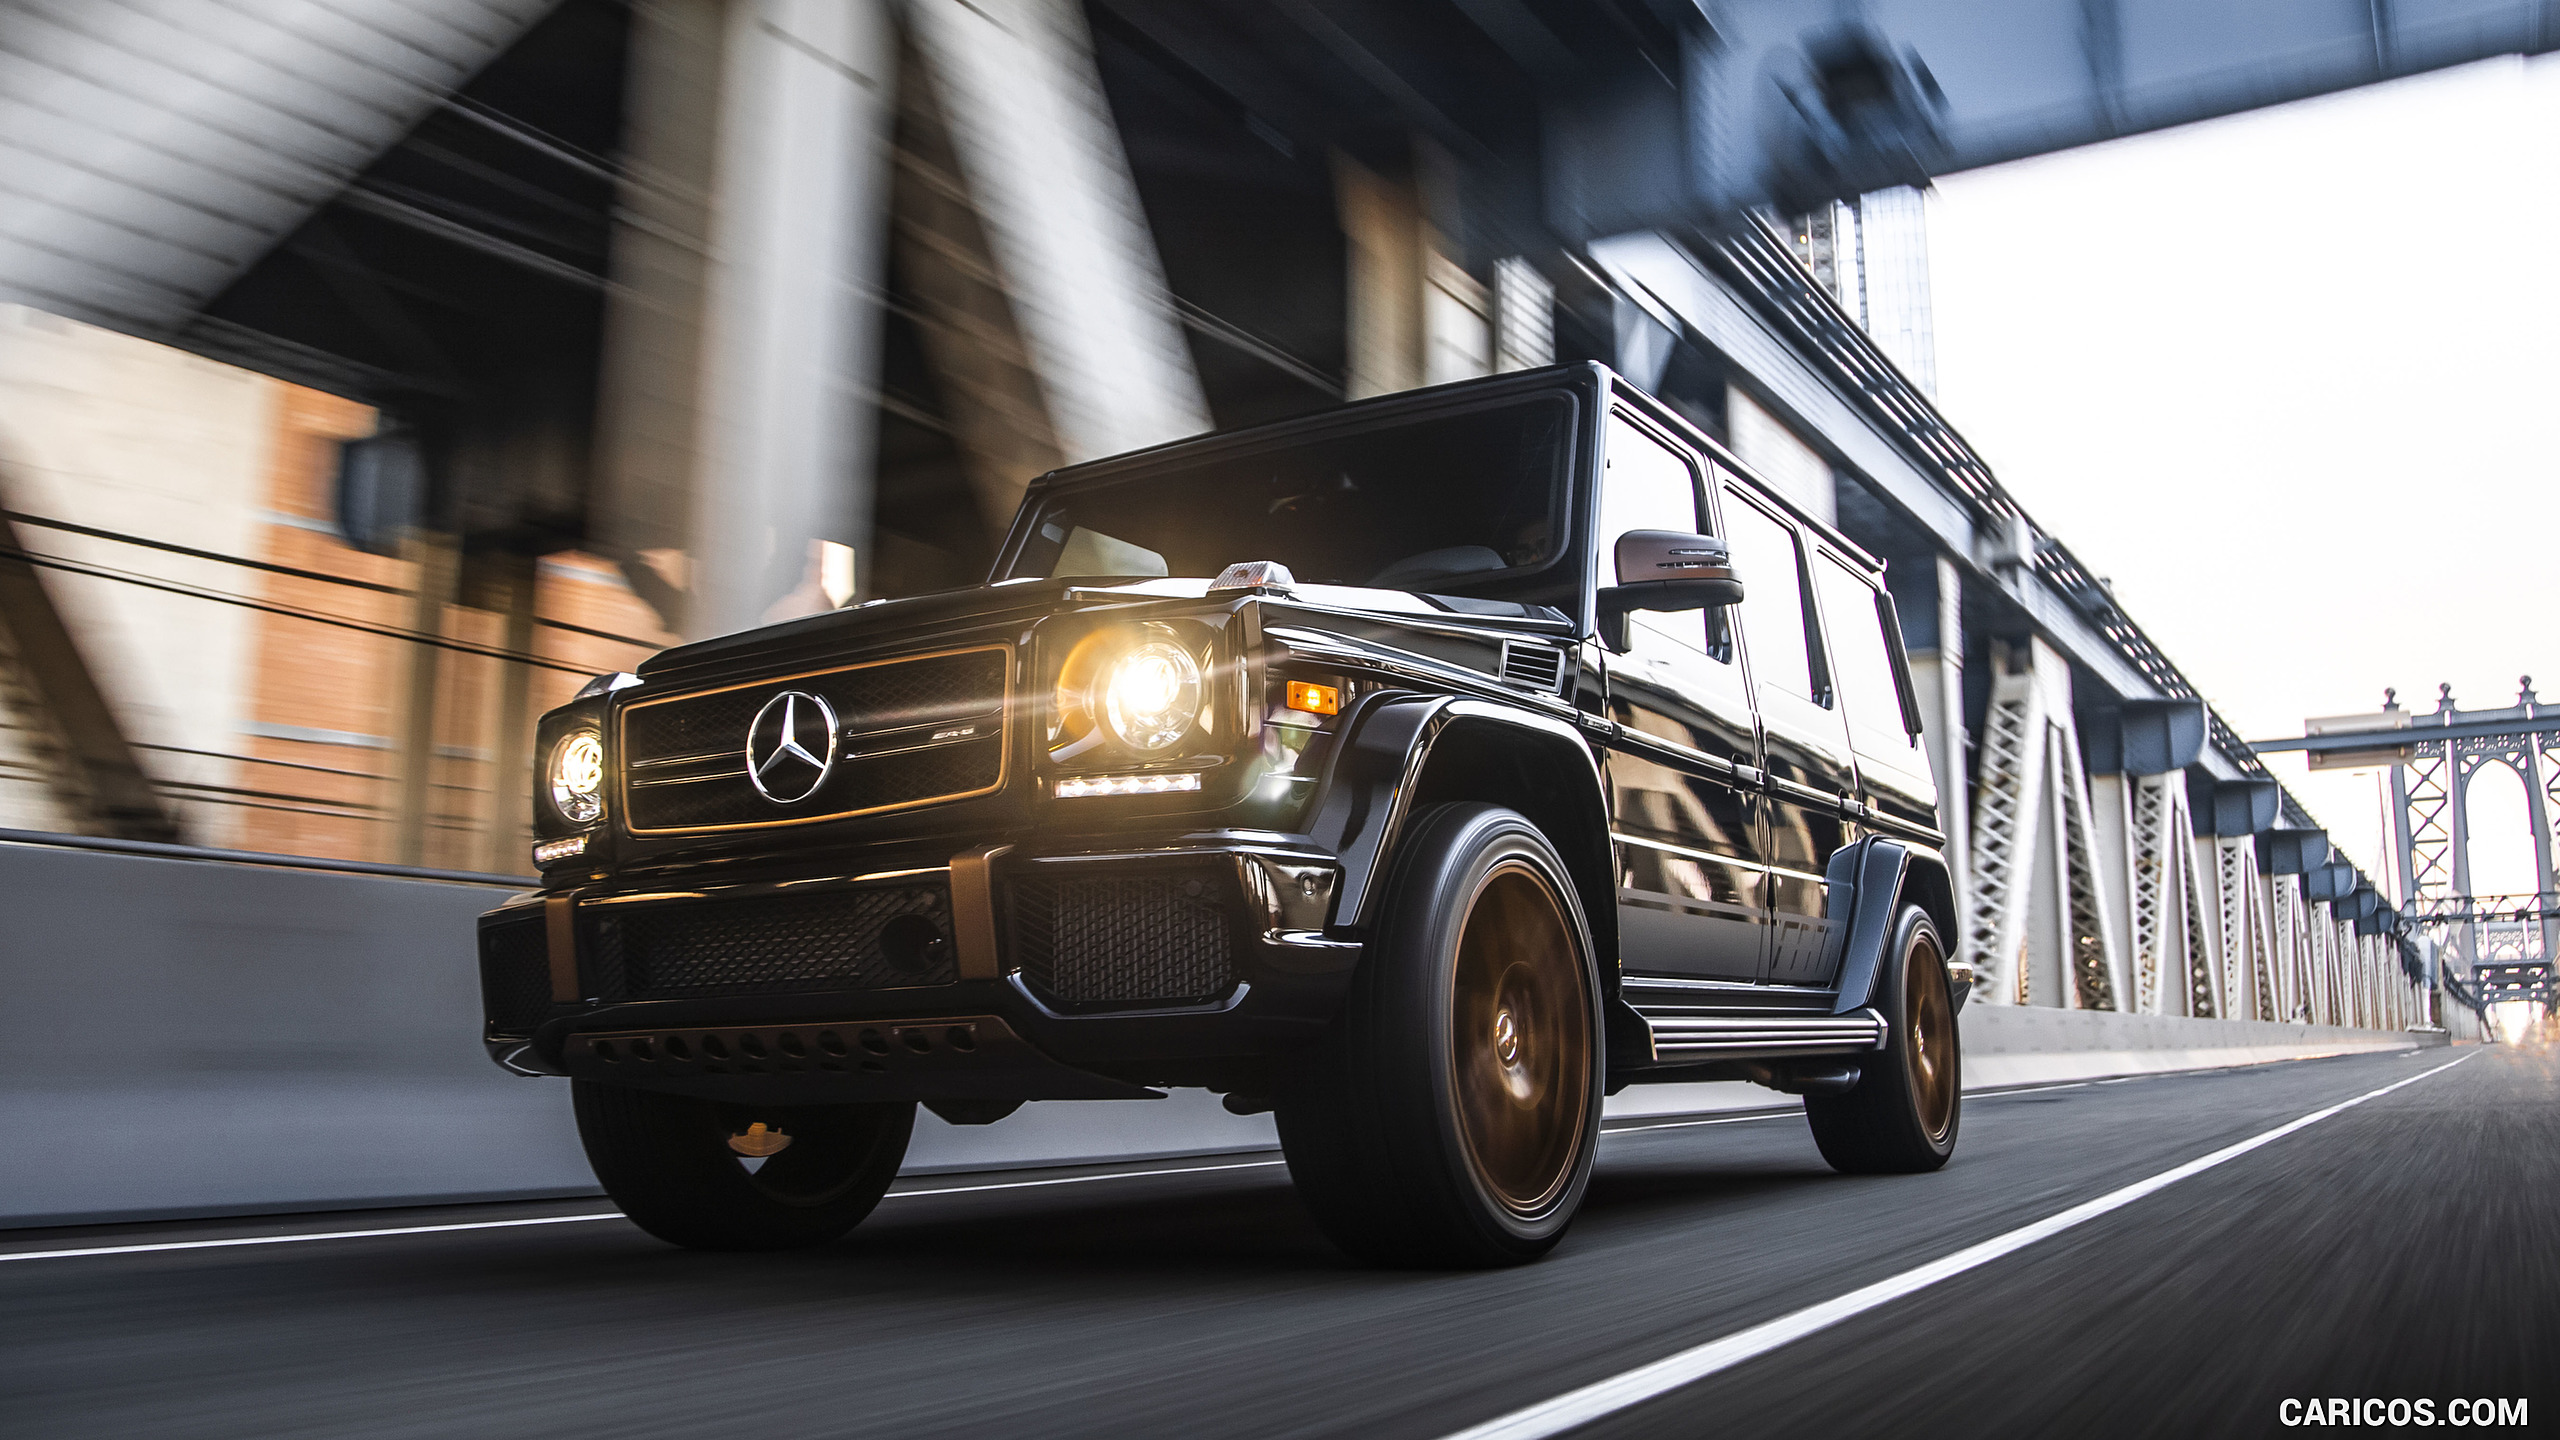 2018 Mercedes-AMG G65 Final Edition (US-Spec) - Front Three-Quarter, #22 of 70